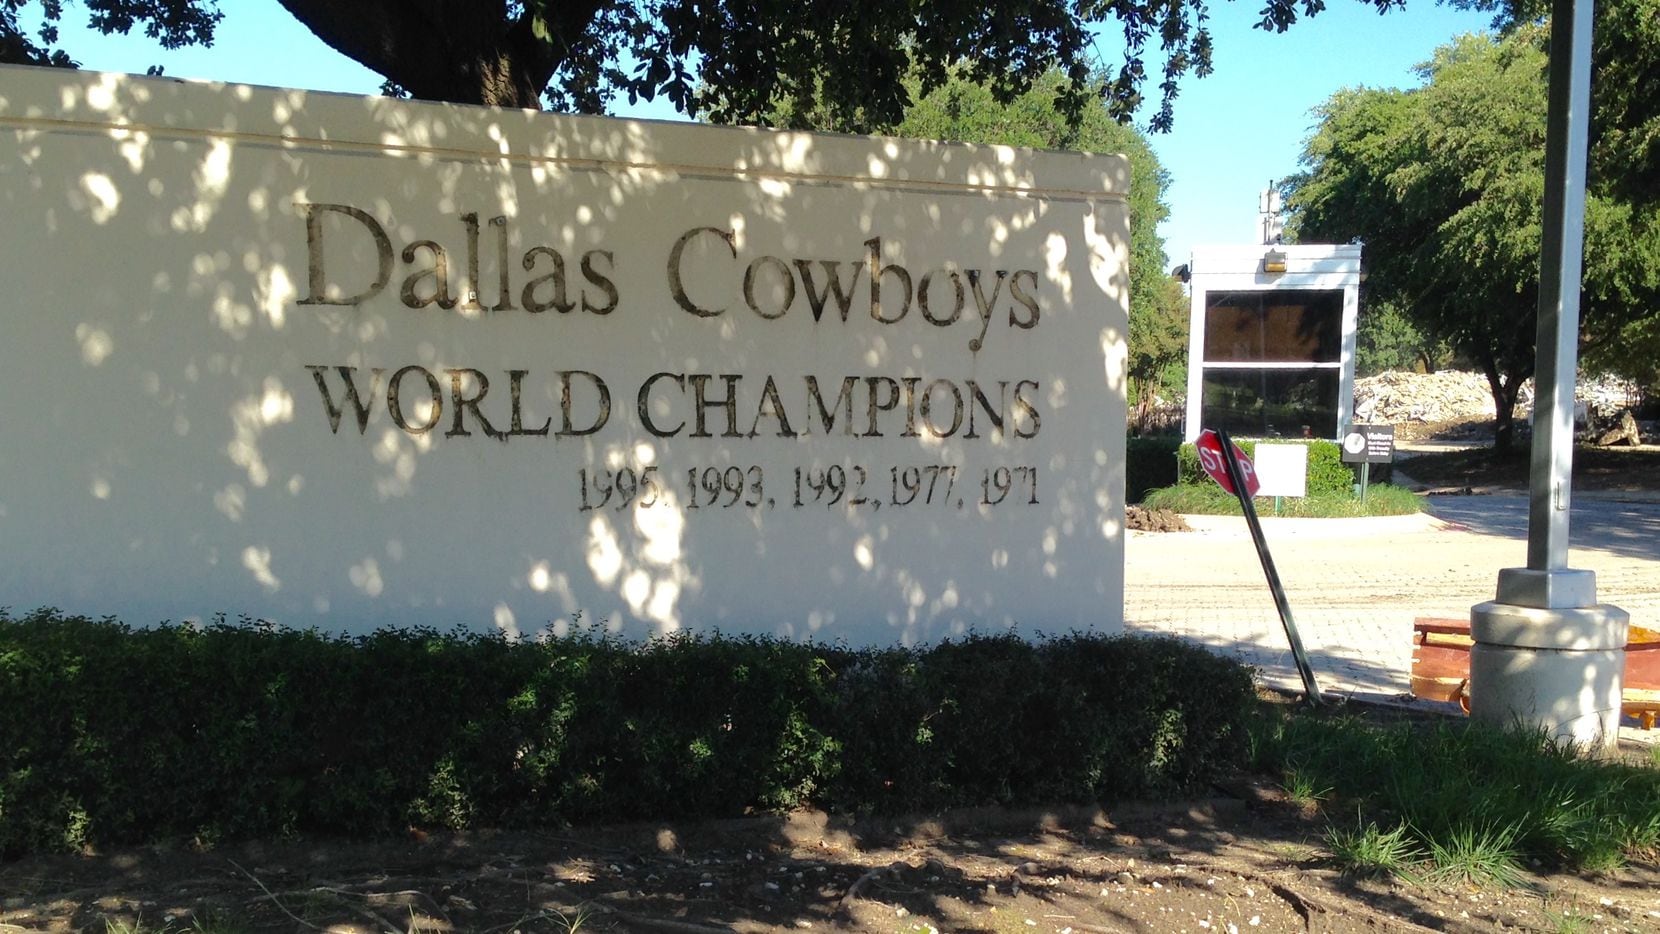 The old entryway to the former Dallas Cowboys headquarters in Irving still brags about past glory days.